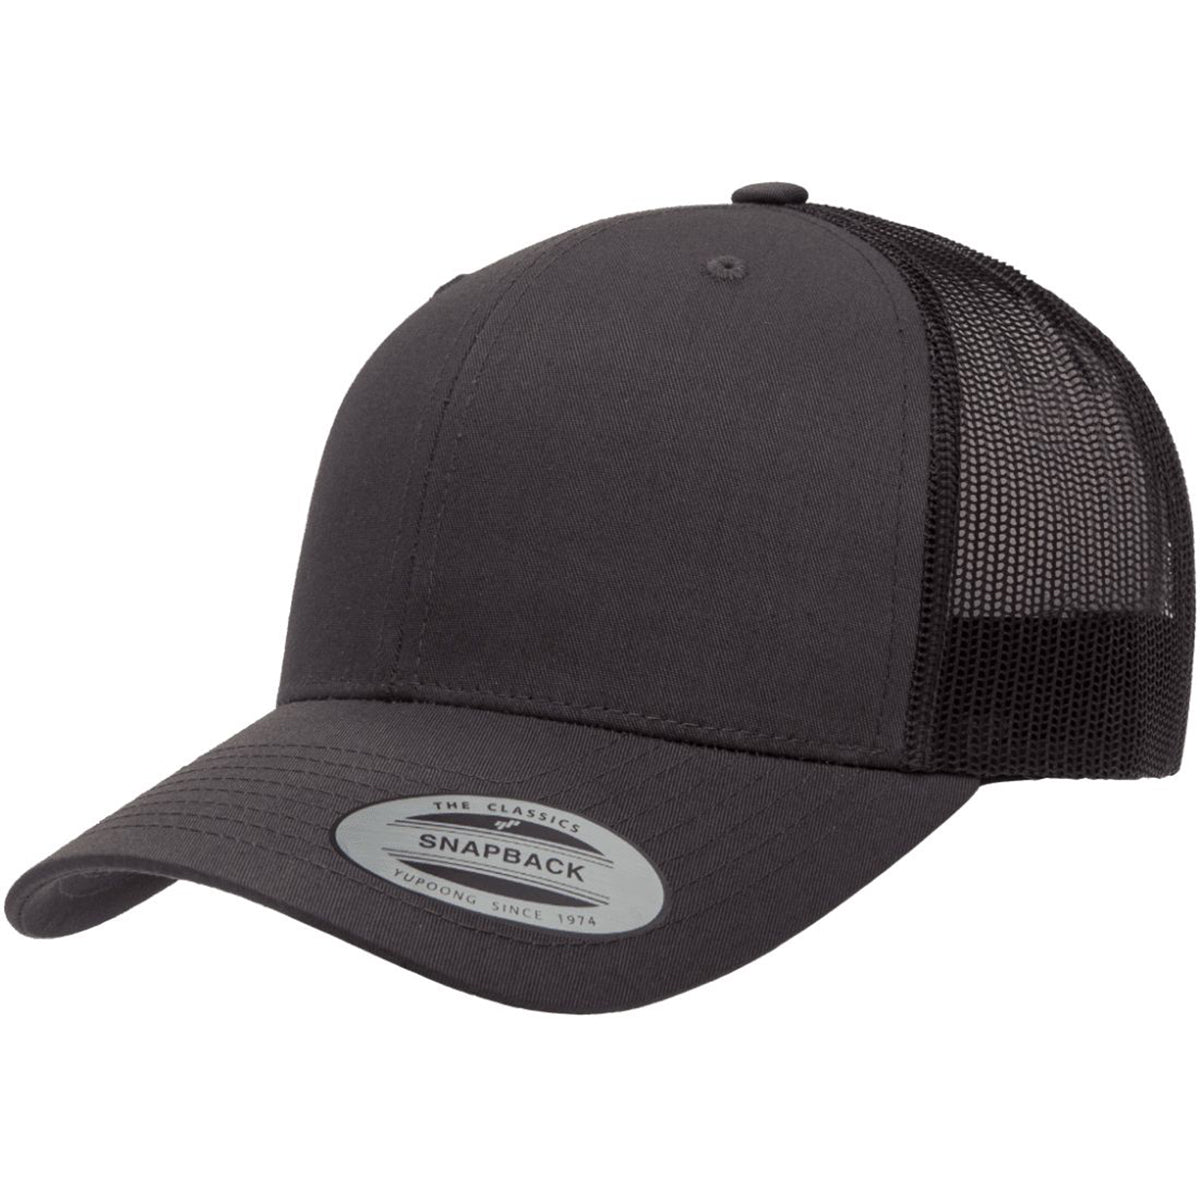 As Hells as each YP Canyon 6606 LEATHER Designs CLASSICS HAT $18 - Low | PATCH